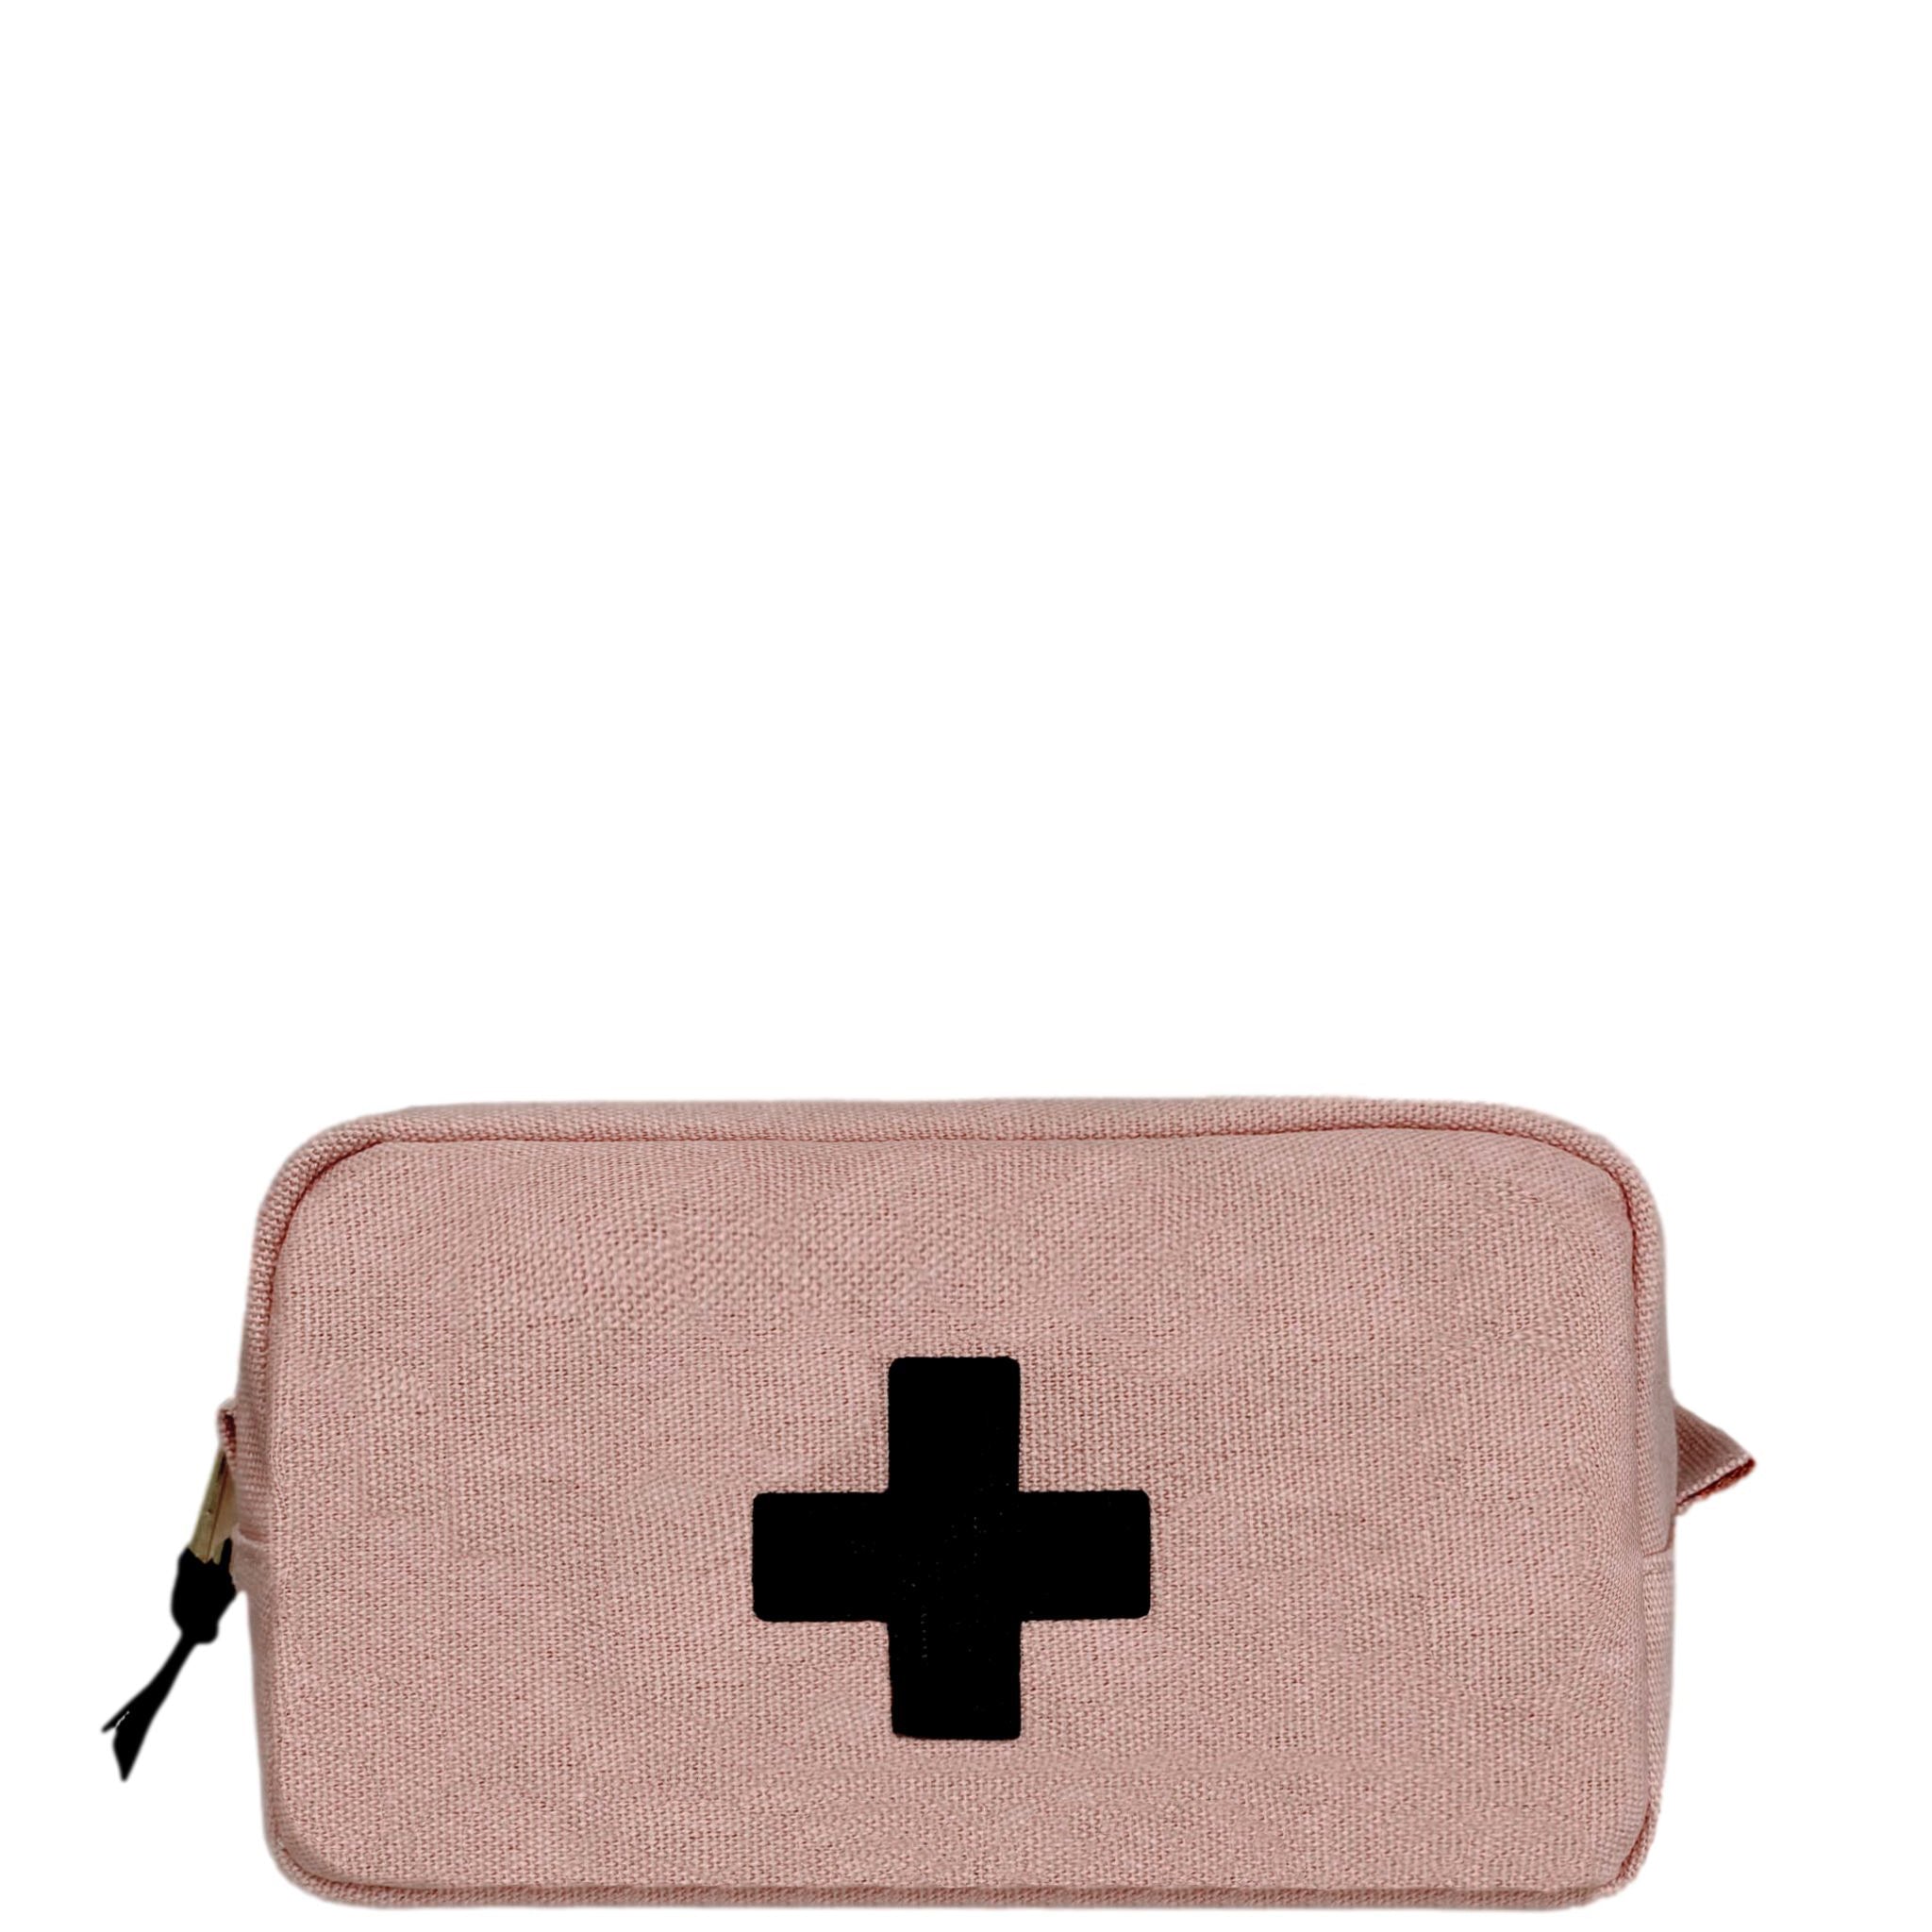 First Aid Organizer Bag (Medicines are not included)